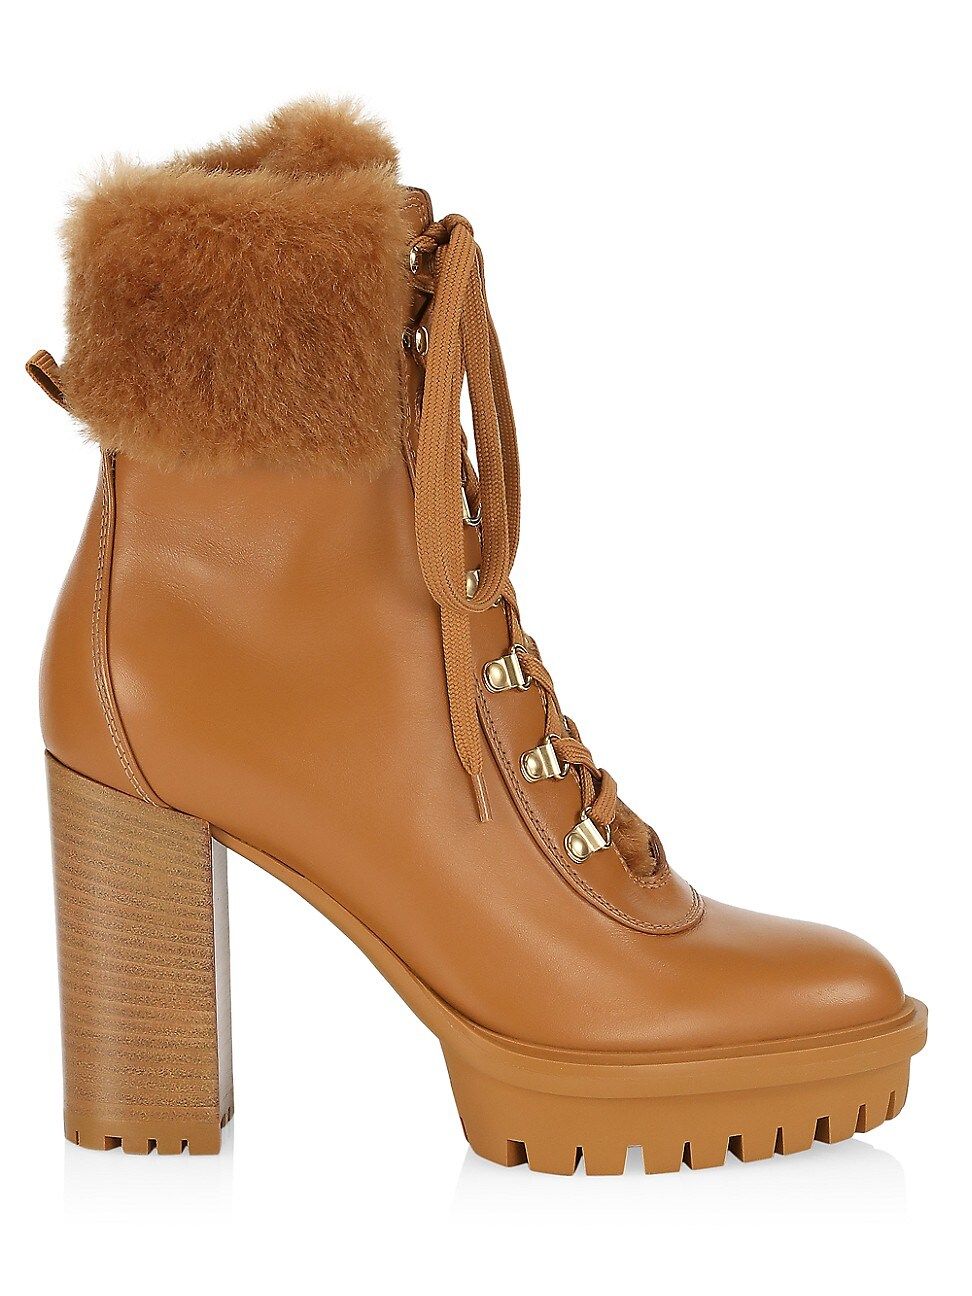 Gianvito Rossi Alaska Leather Fur-Trimmed Boots | Saks Fifth Avenue